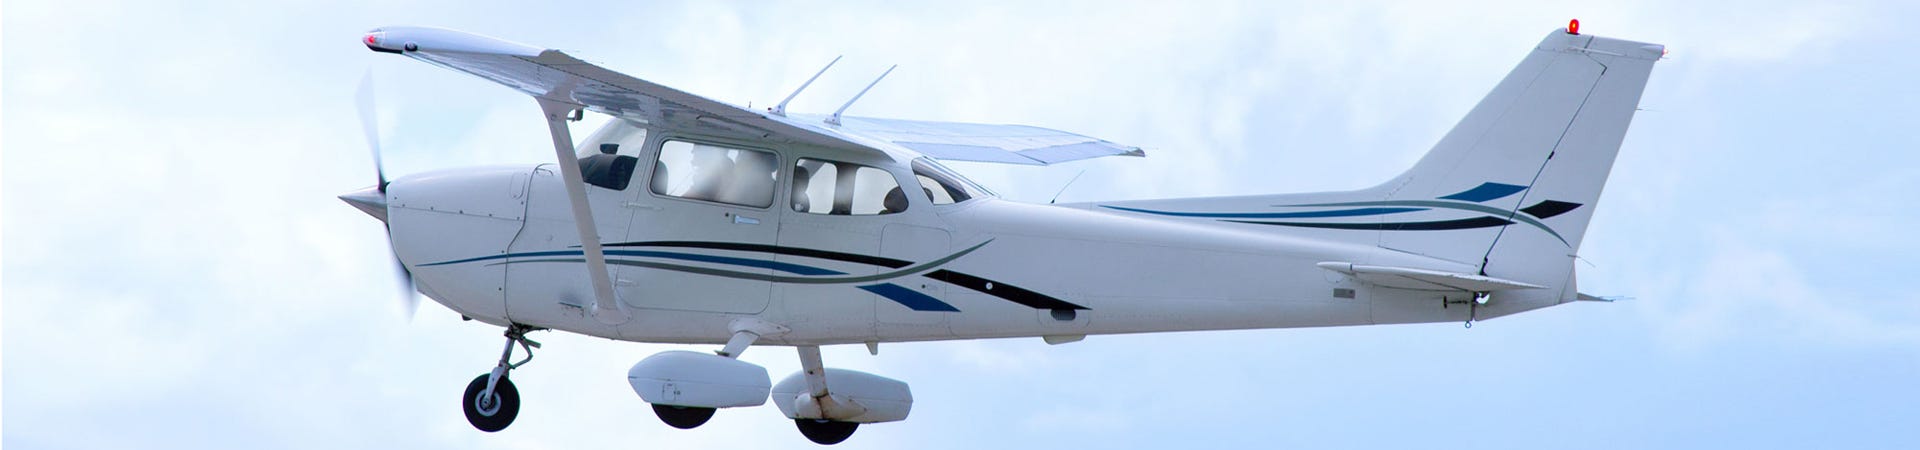 5 Reasons to Buy a Used Airplane